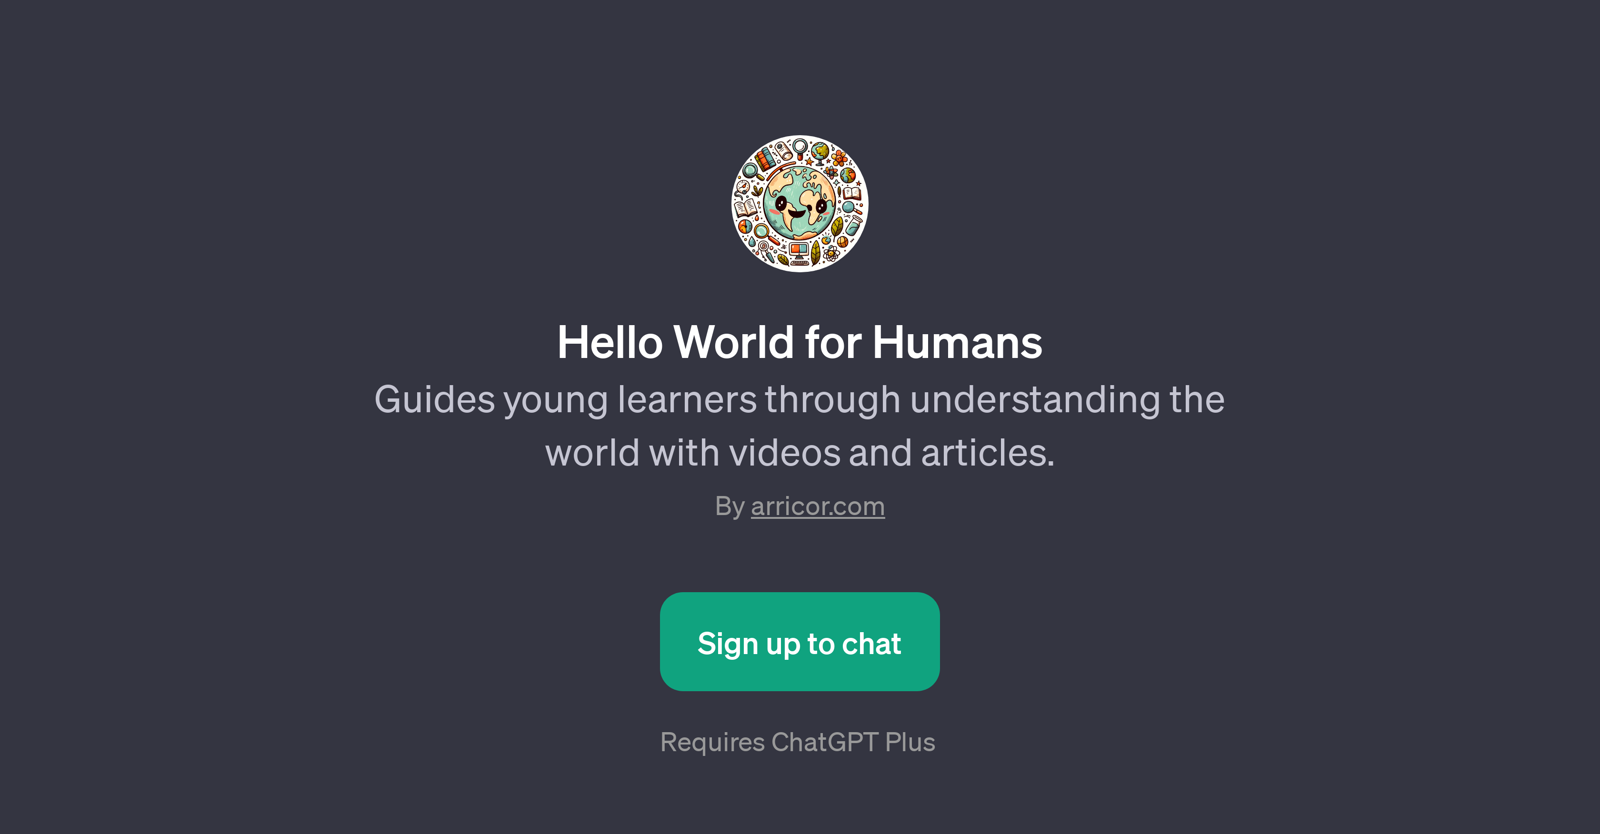 Hello World for Humans website